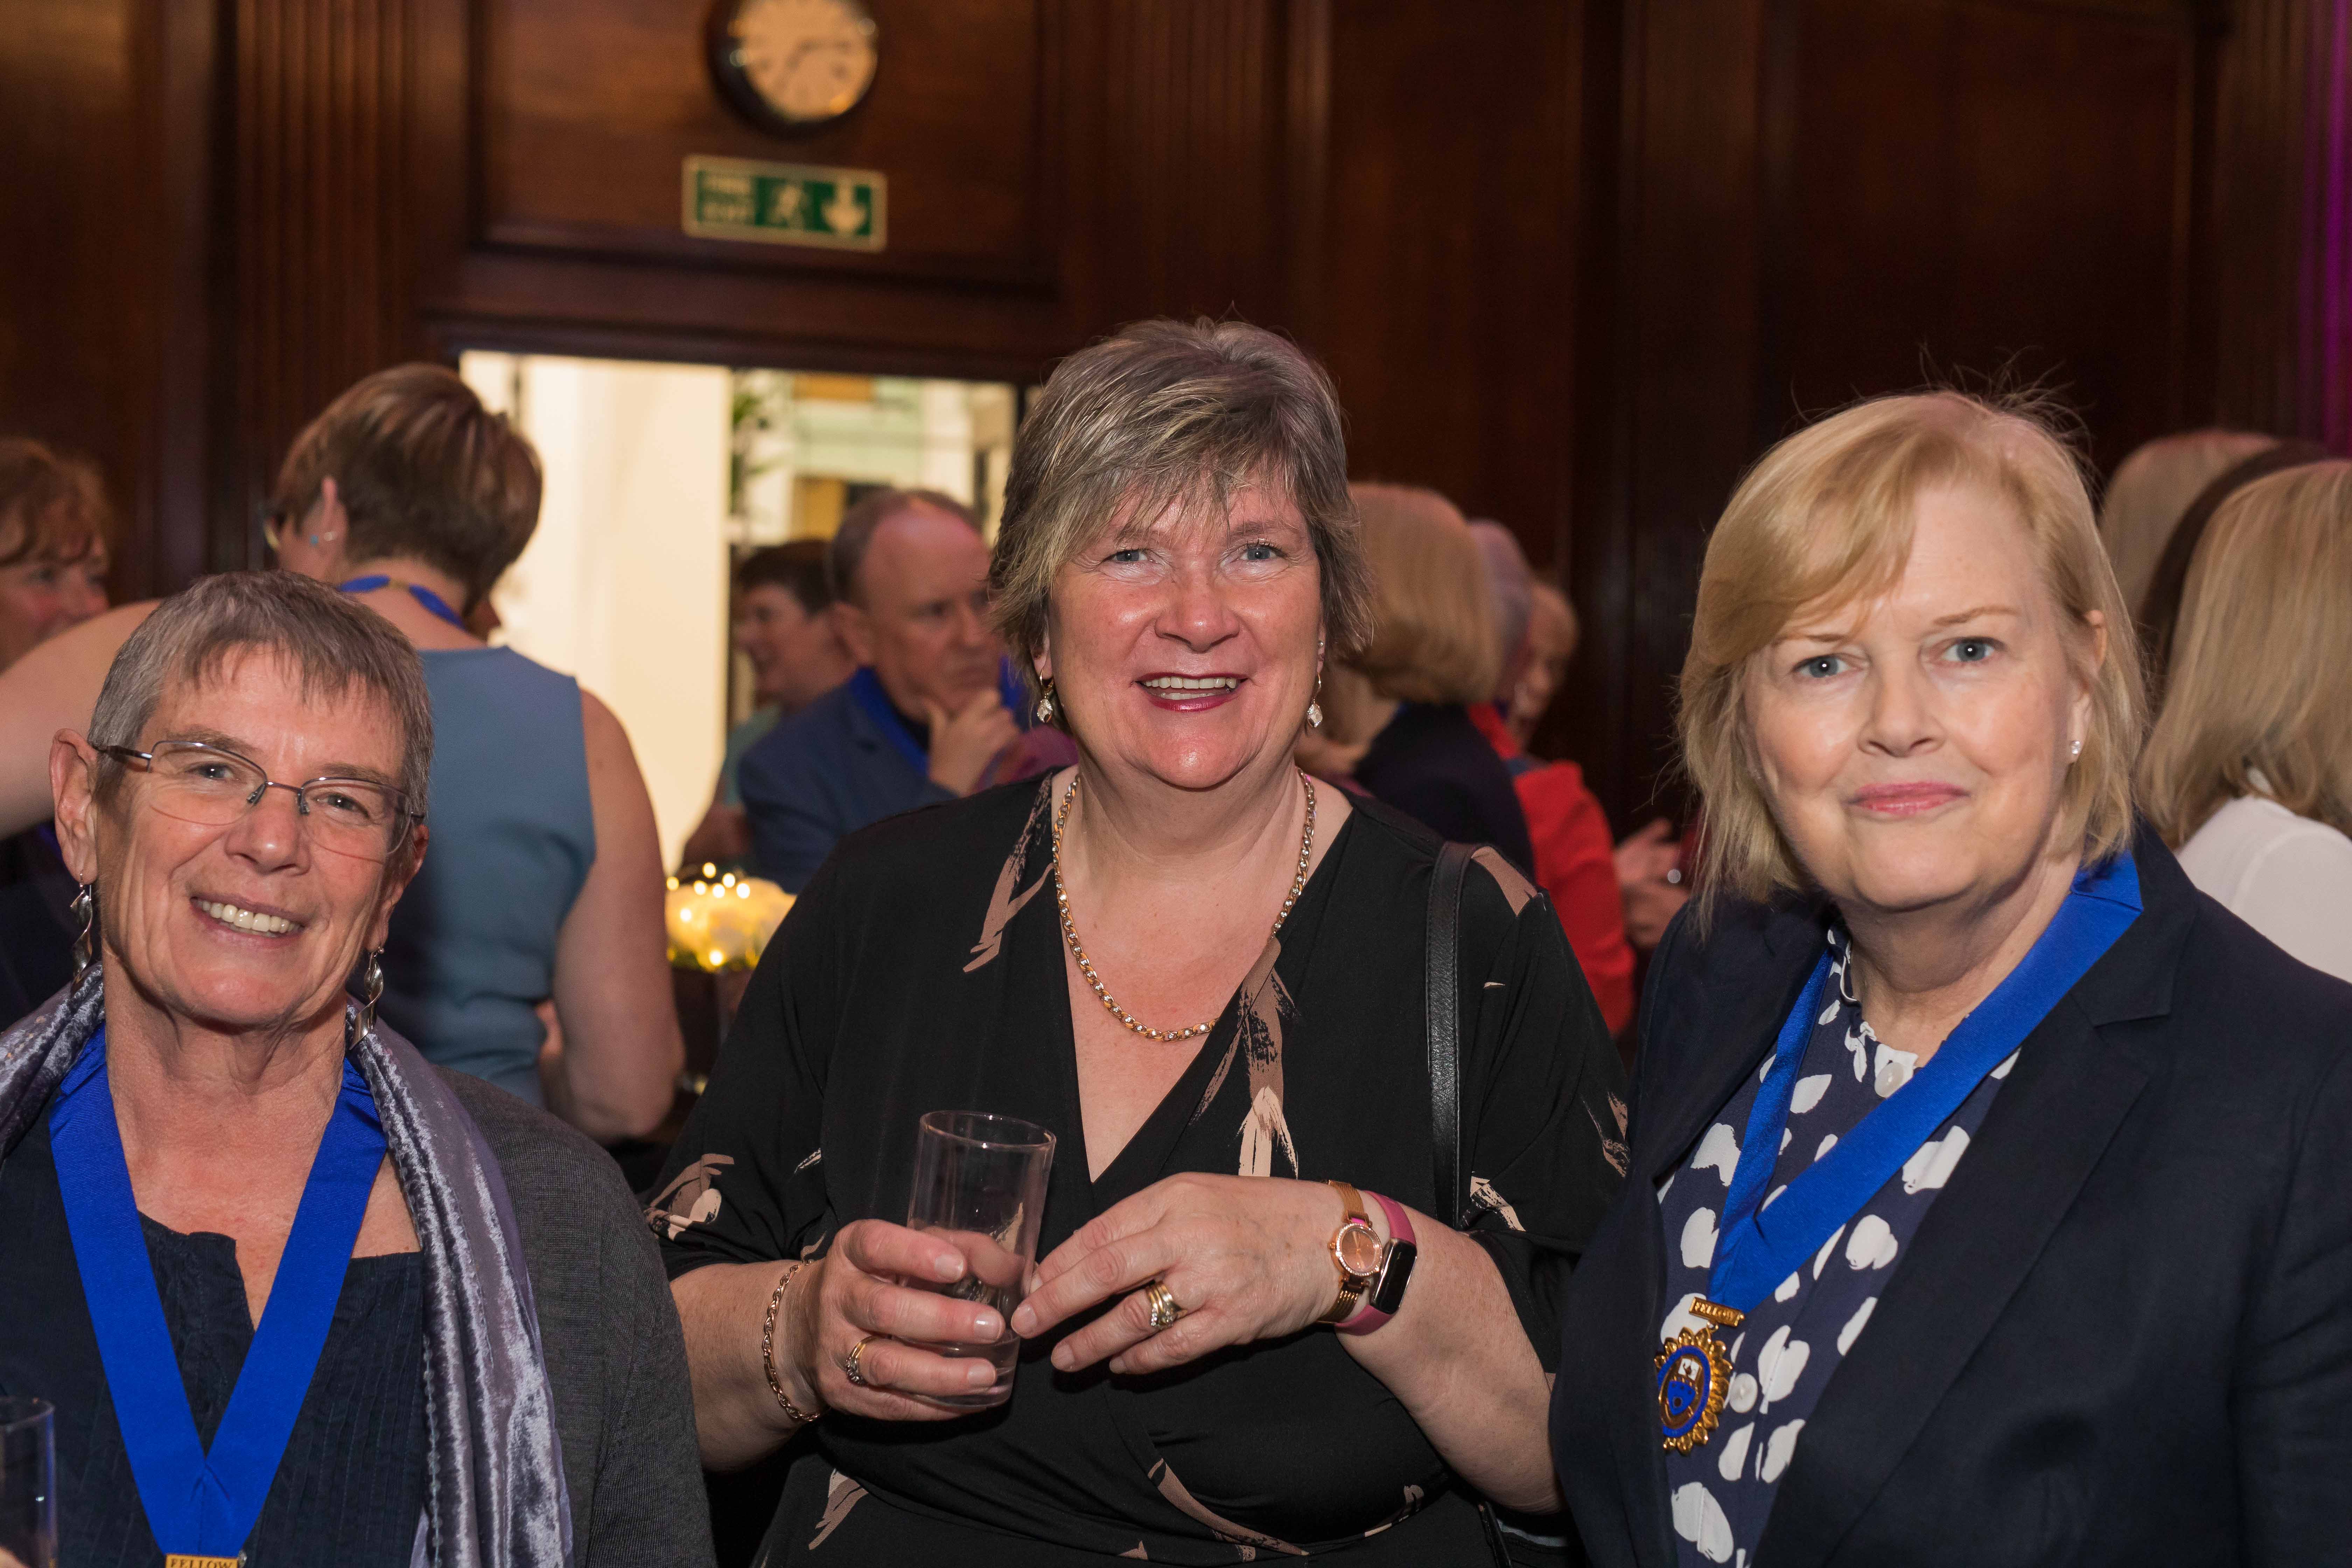 Rachel Hollis FRCN (Chair of the RCN Professional Nursing Committee), Sandra Campbell FRCN and Felicity Cox FRCN